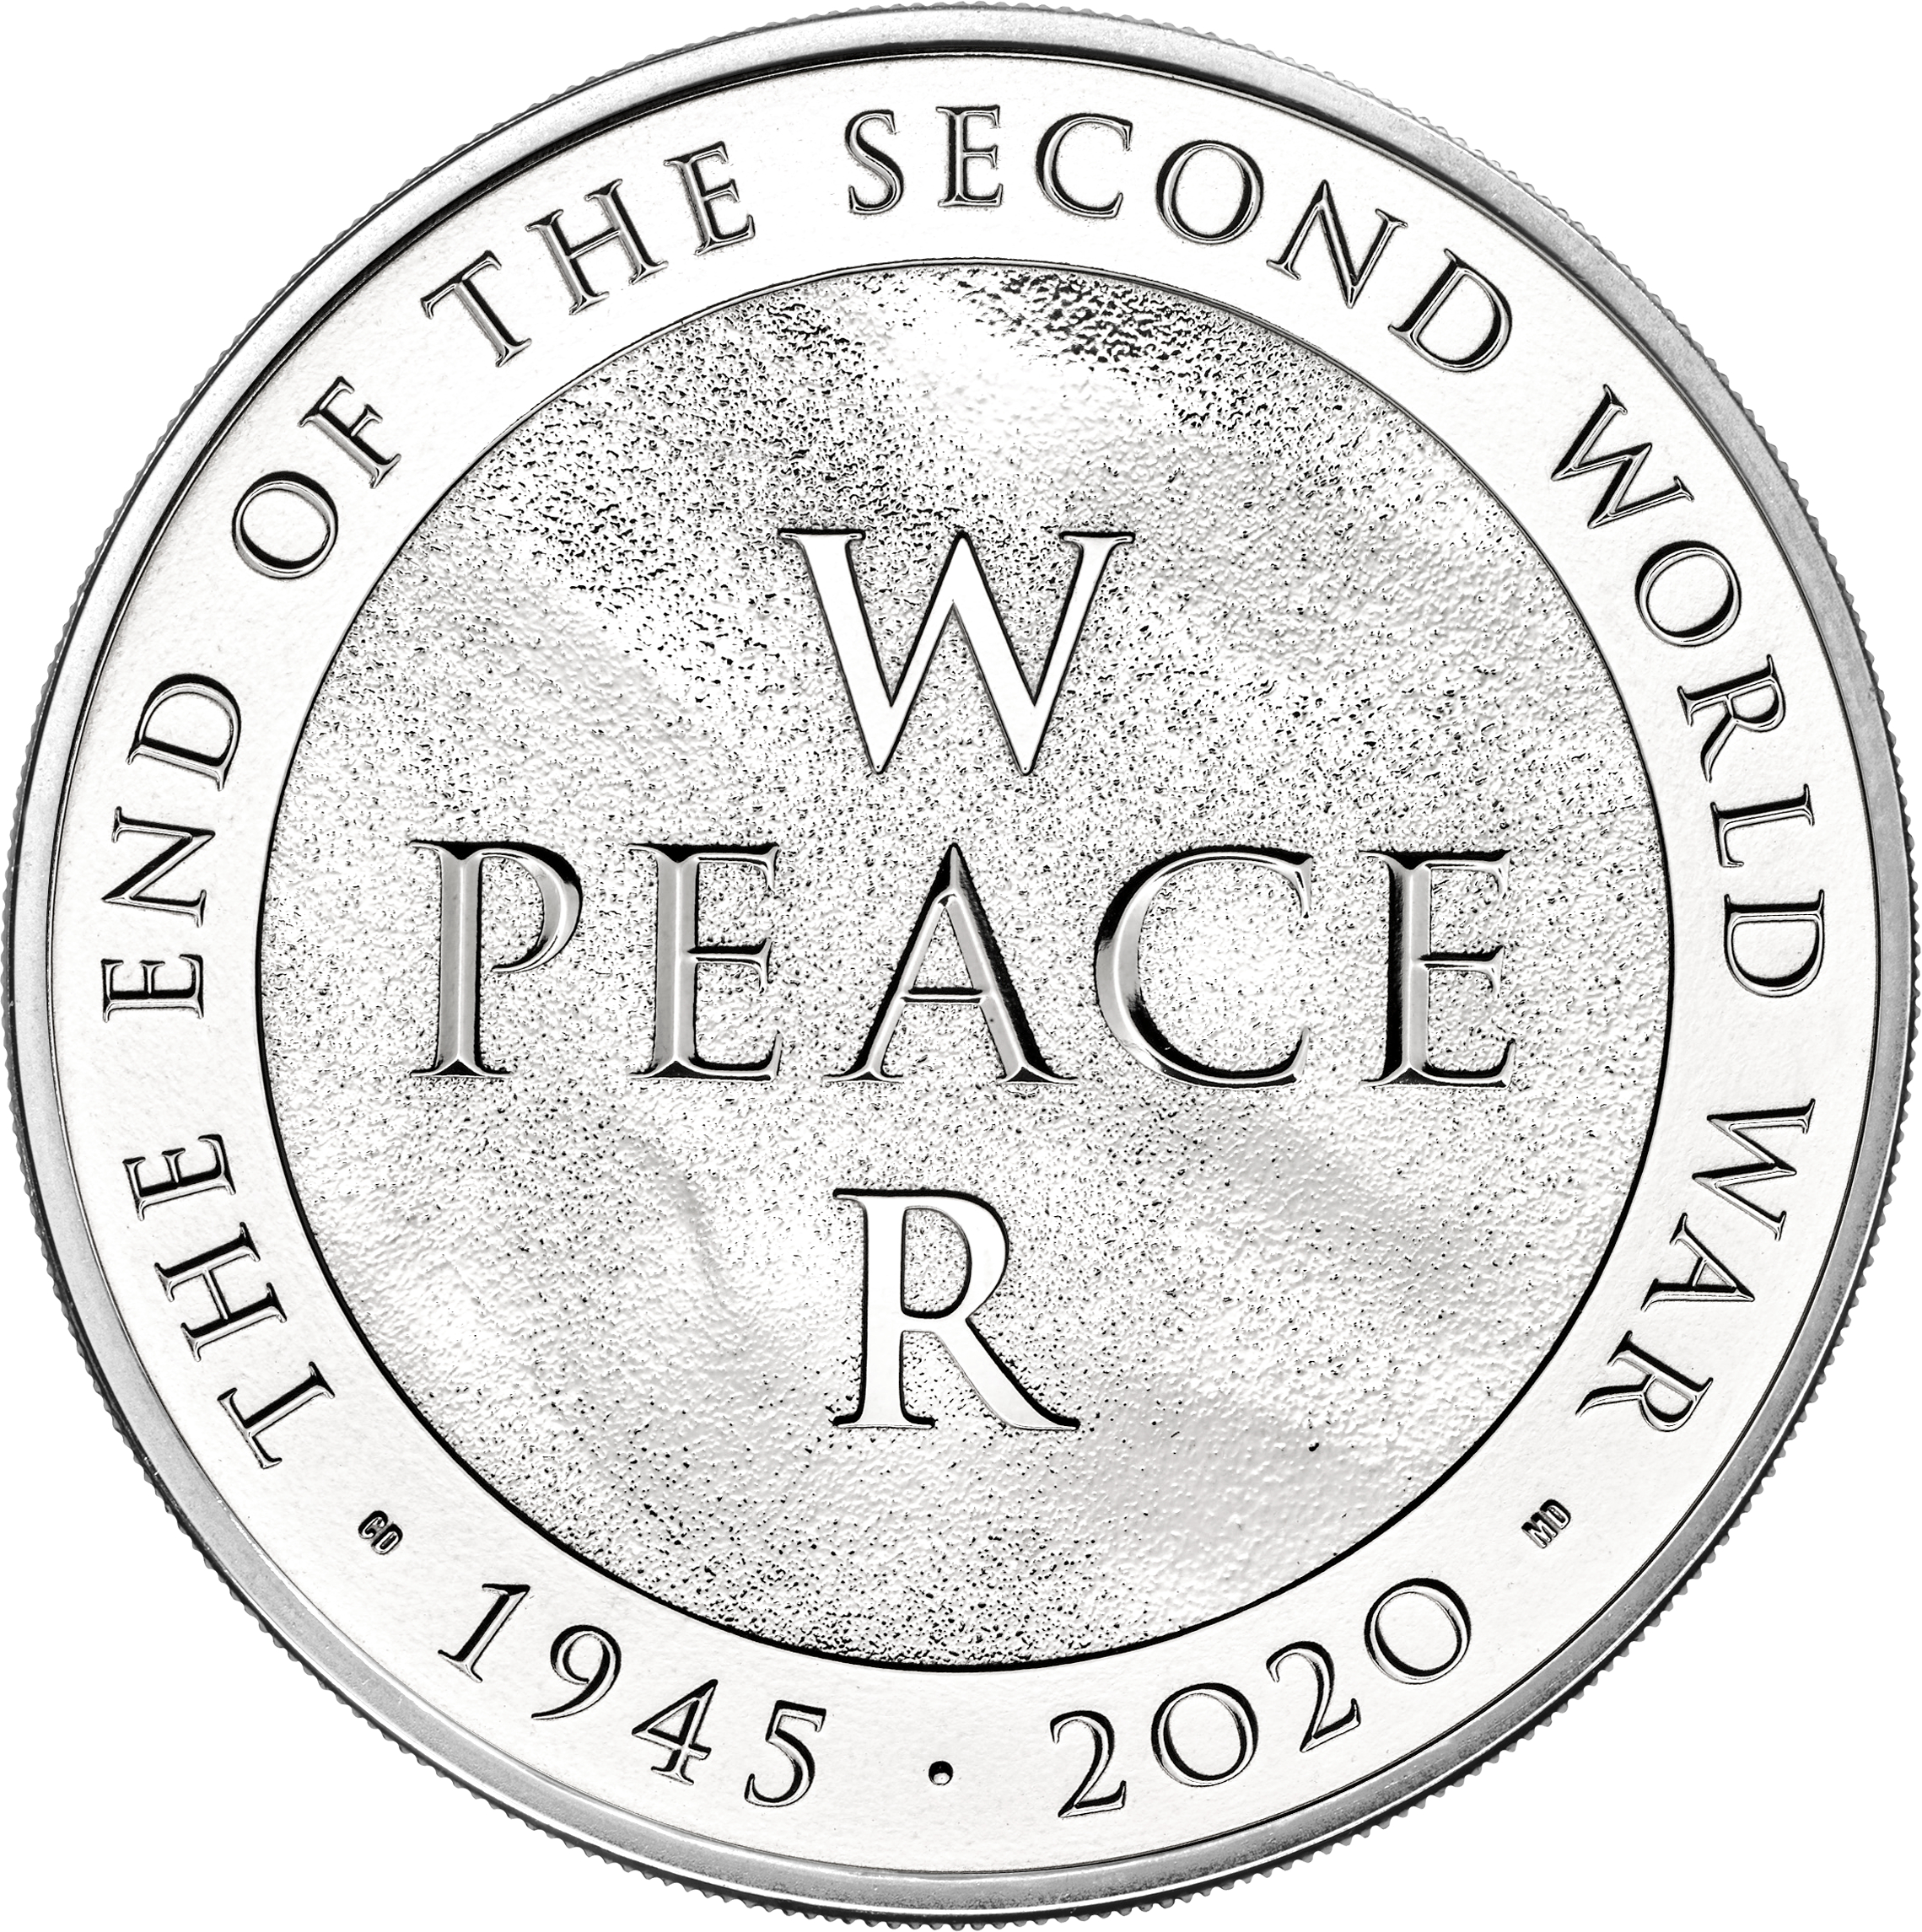 New coin to mark the 75th anniversary of the end of the Second World War